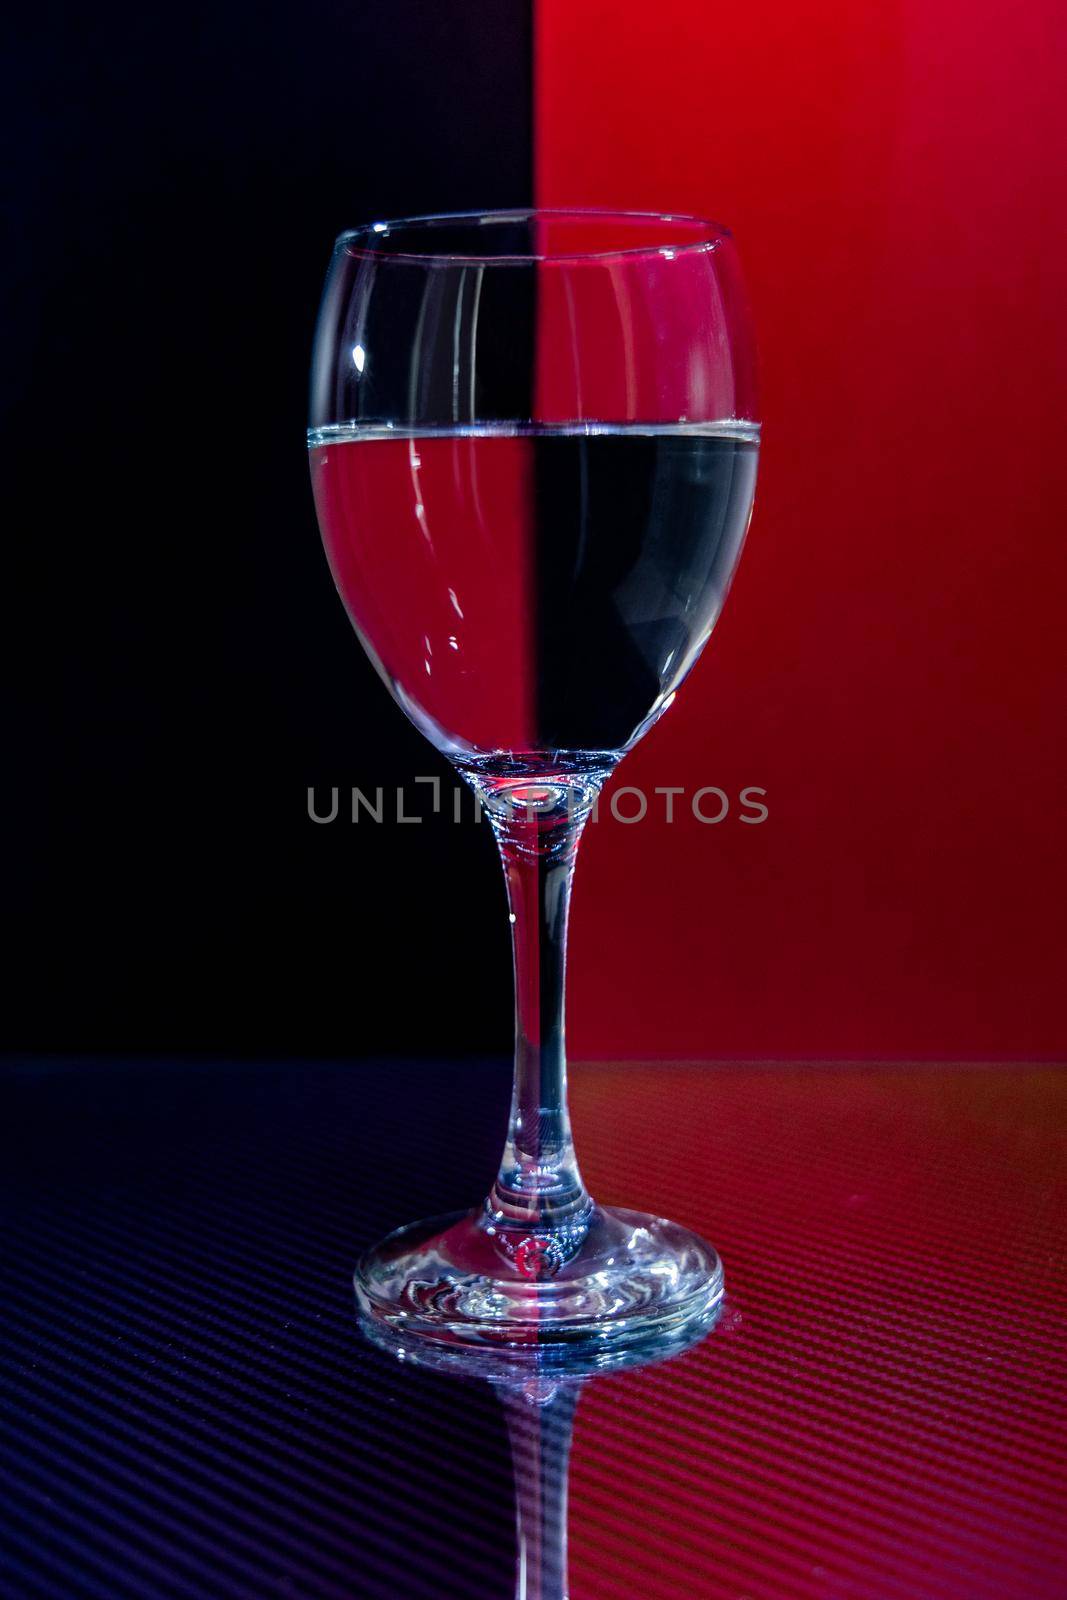 Small glassy goblet with water standing on glassy carbon reflecting surface with reflecting red and black background by Wierzchu